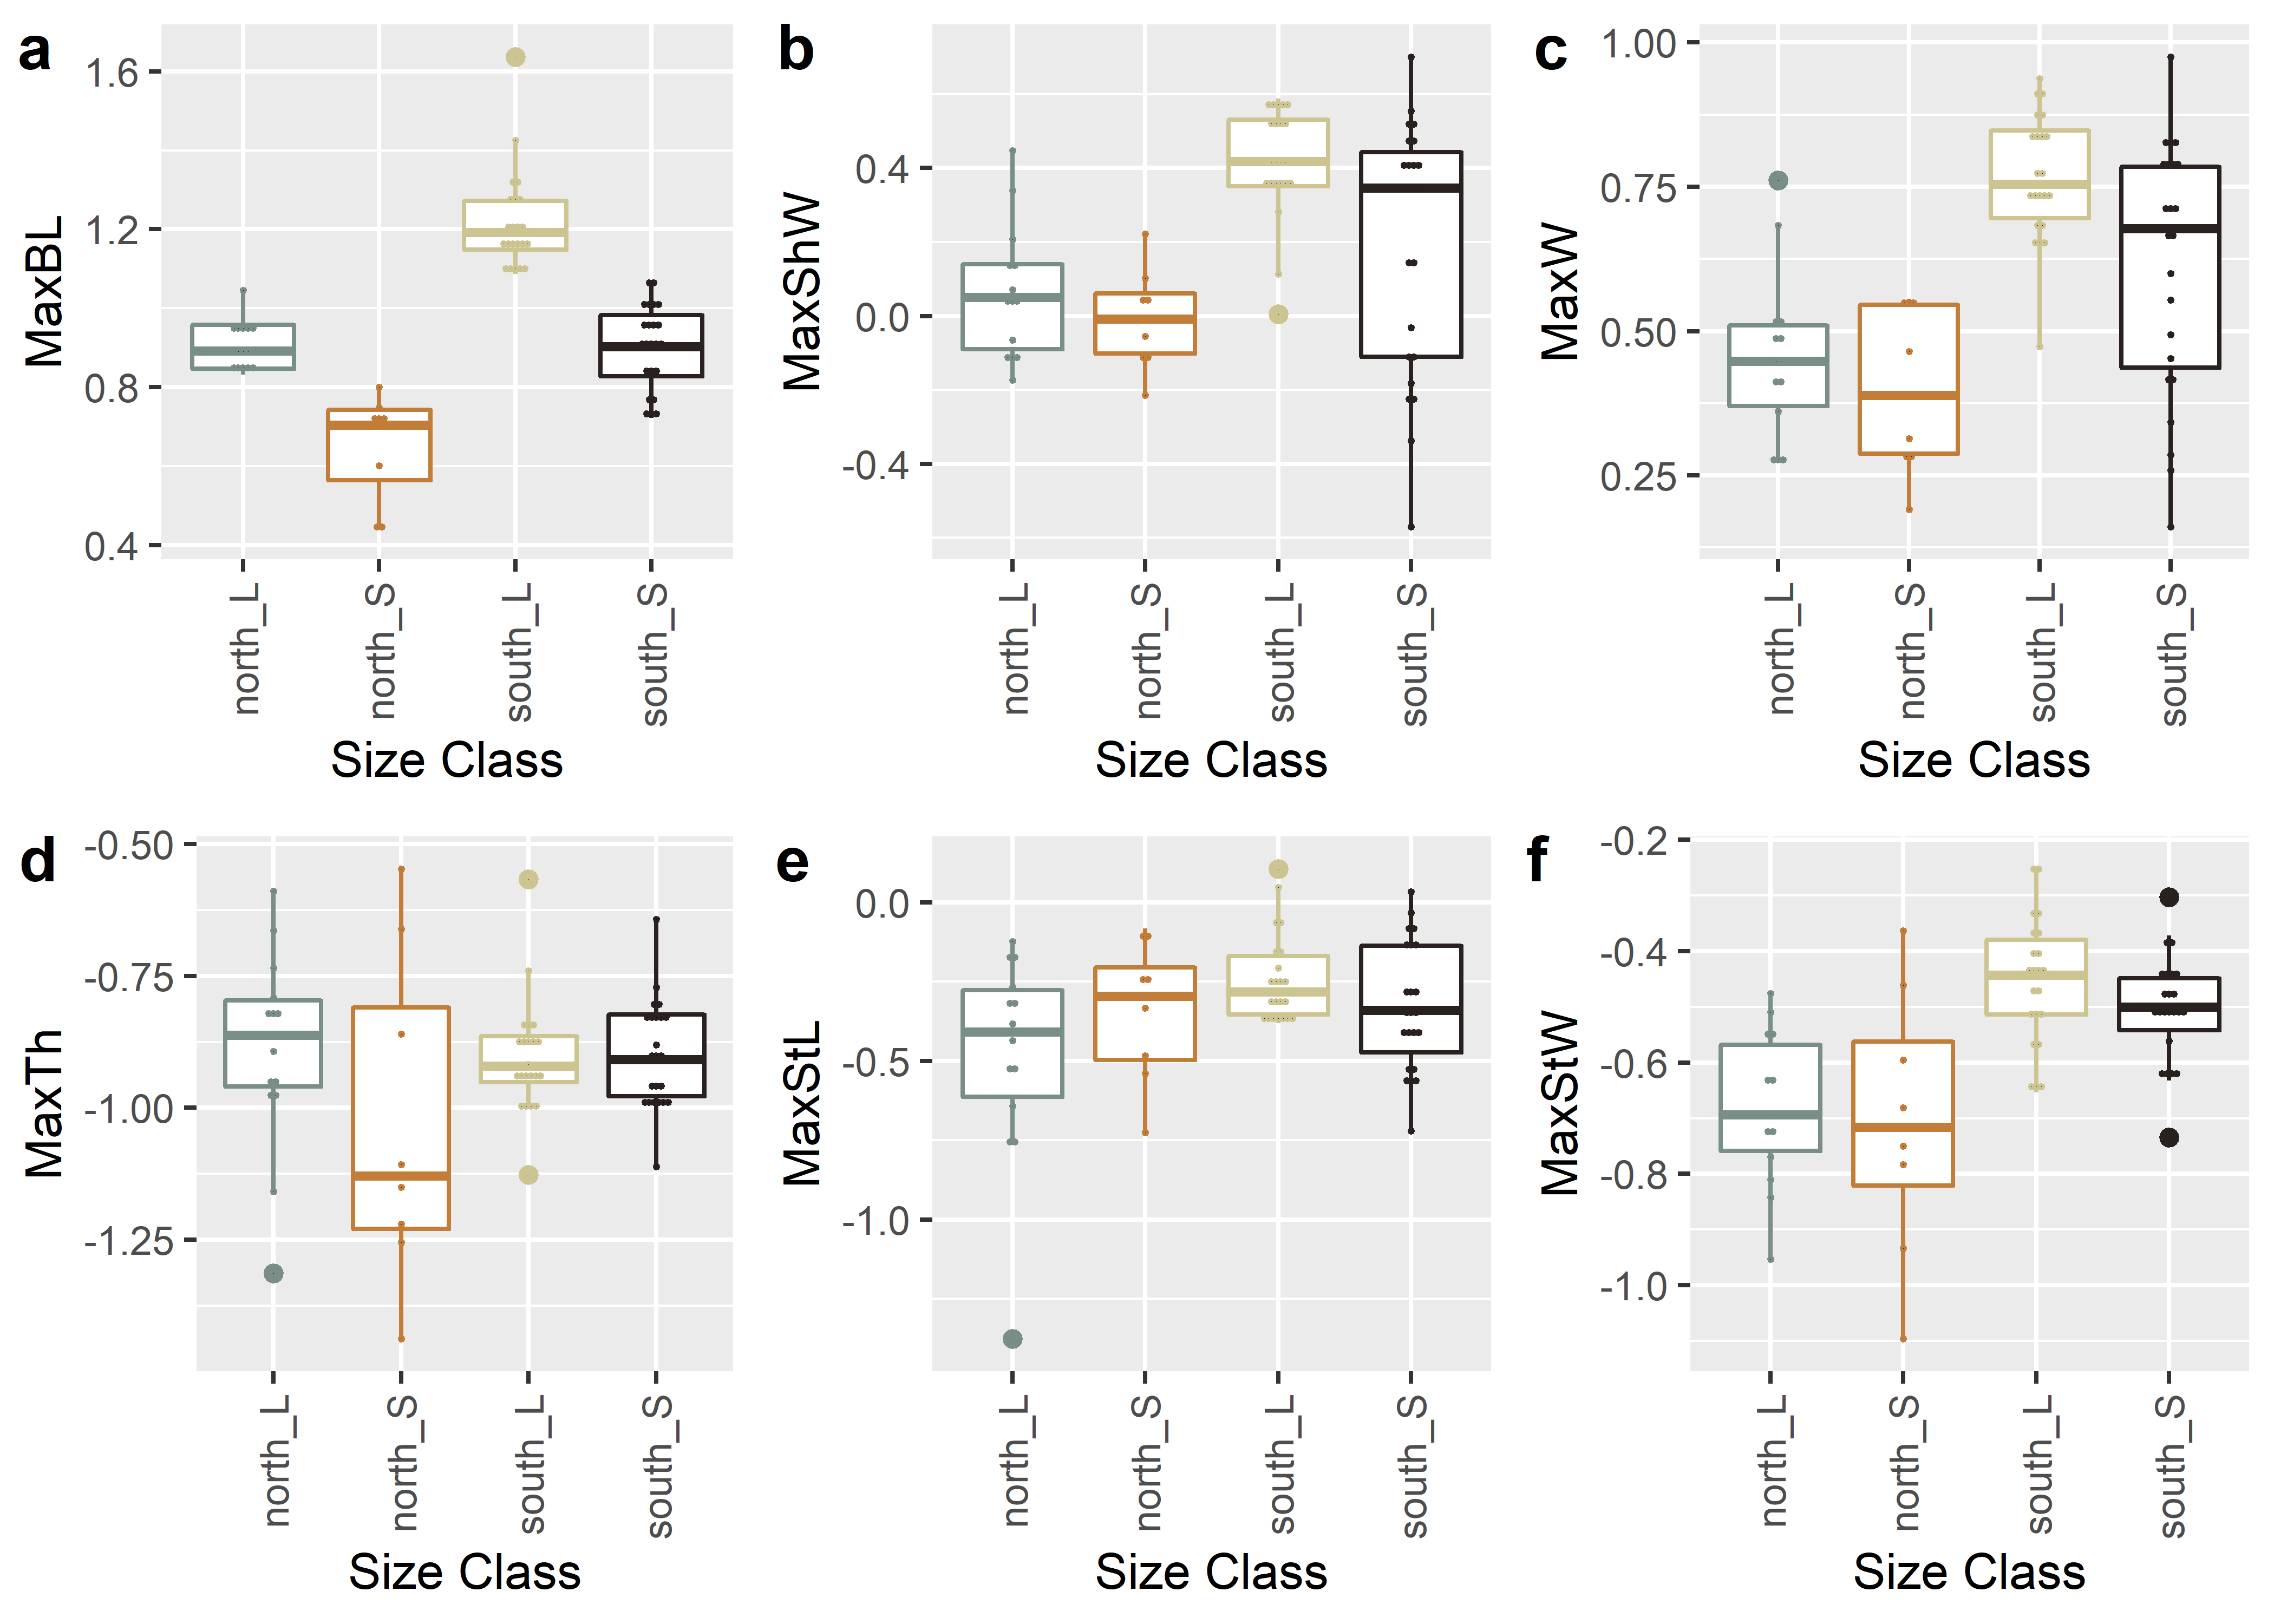 Boxplots for shape variables associated with a, maximum length; b, width; c, thickness; d, stem length; and e, stem width for Perdiz arrow points from the northern and southern behavioural regions.